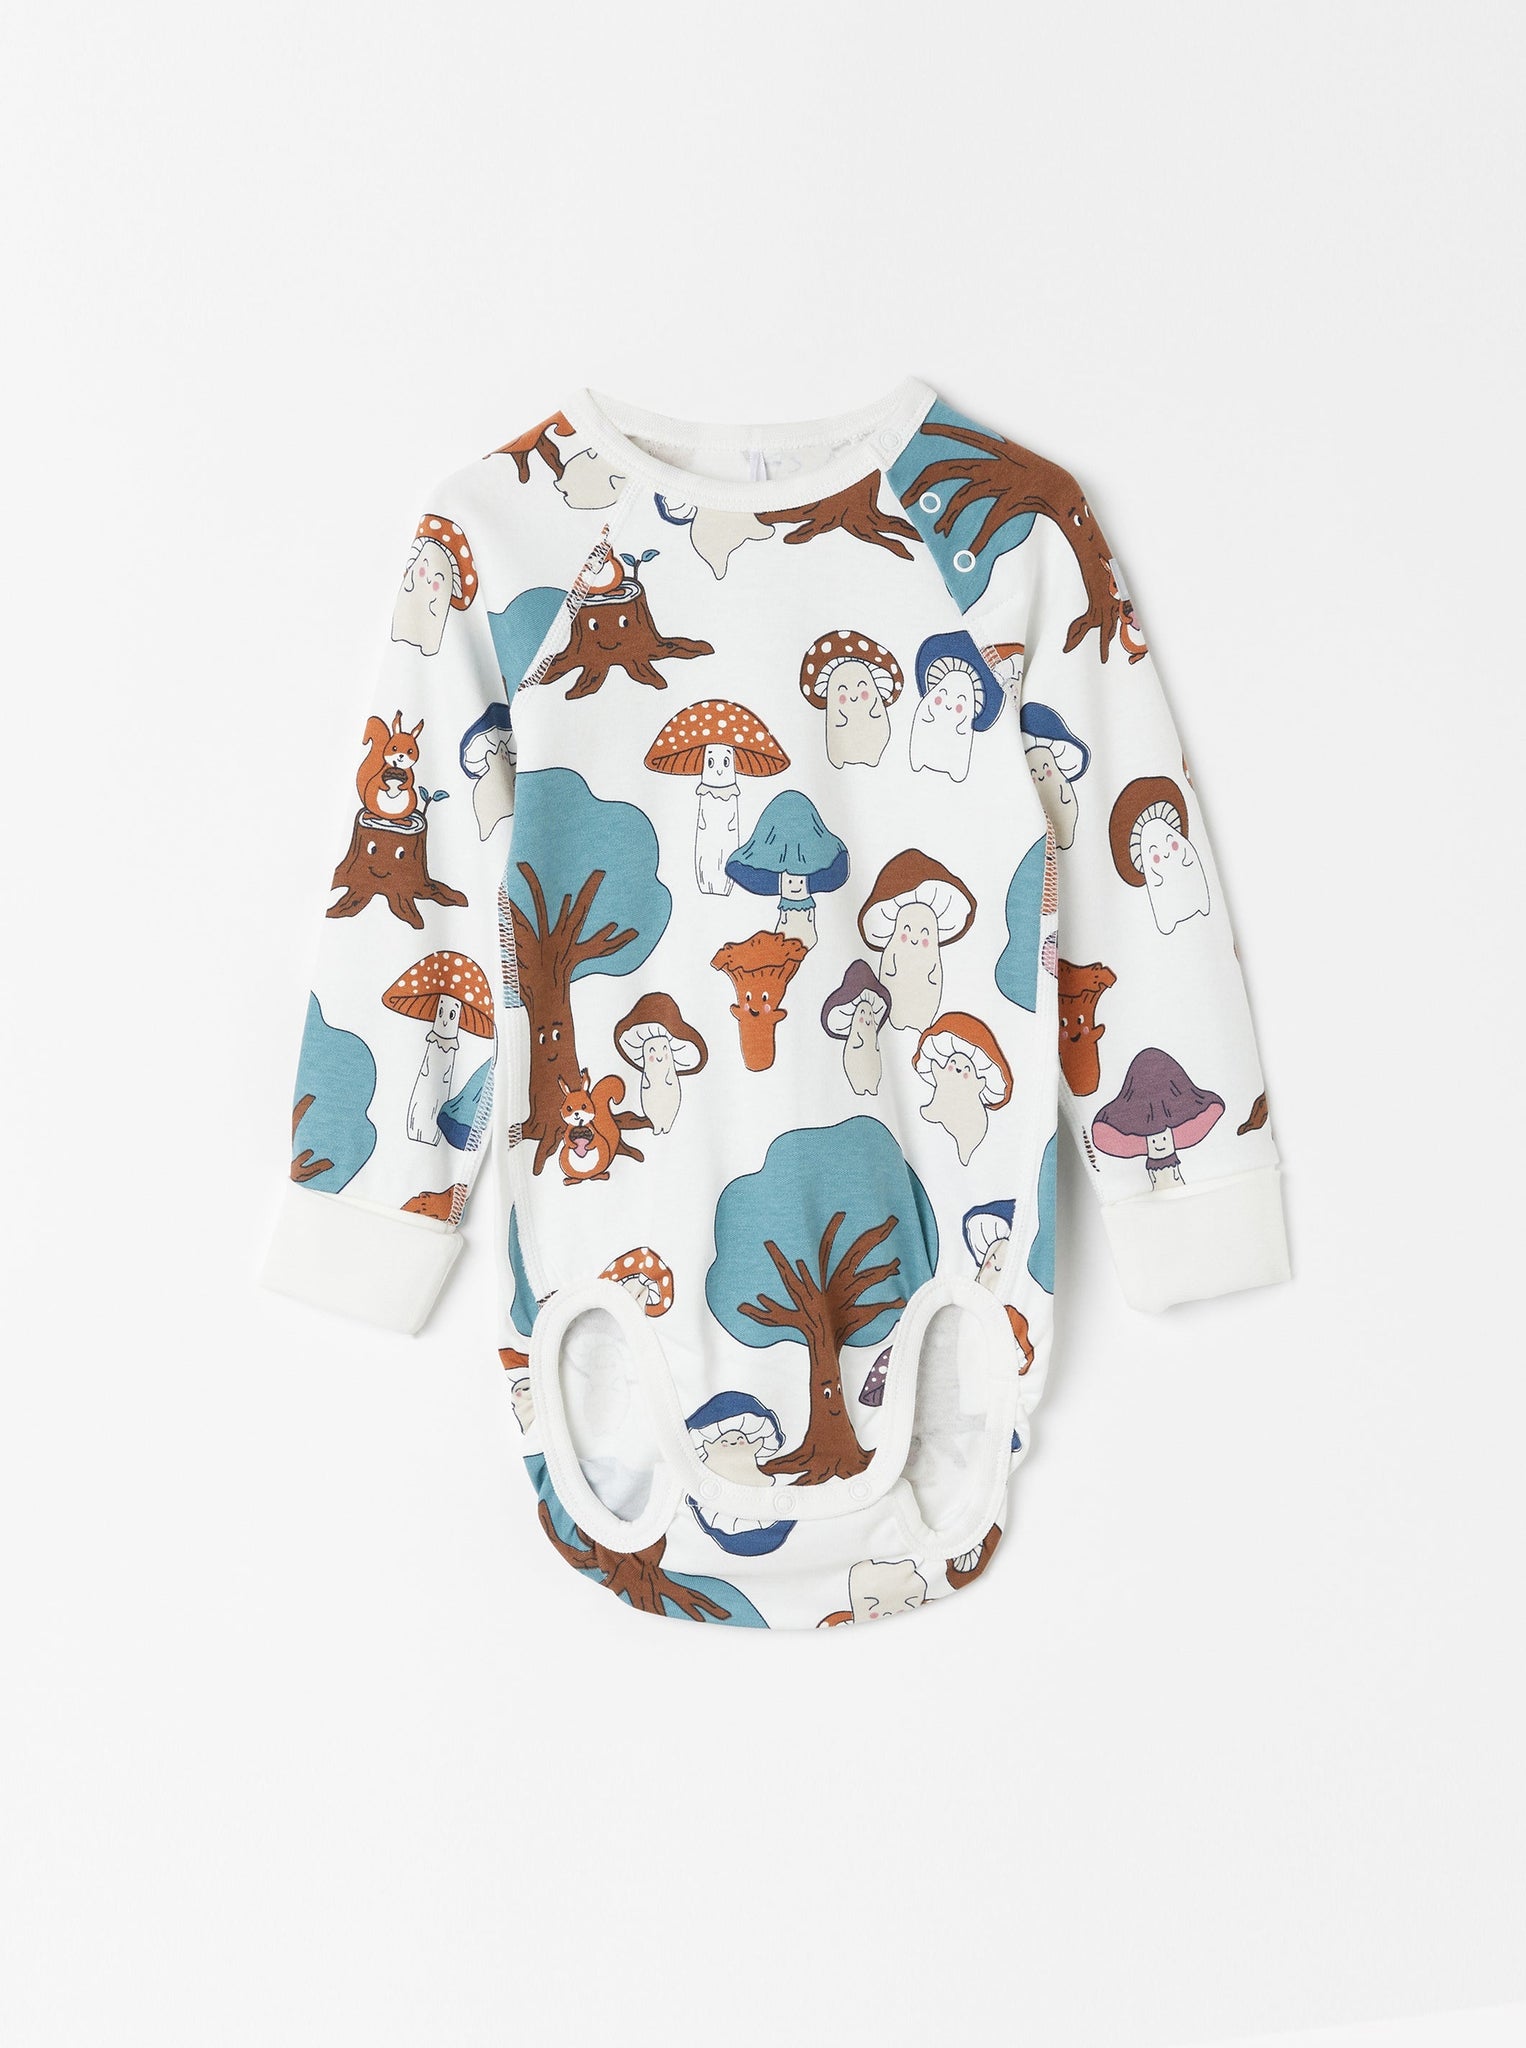 Organic Cotton White Babygrow from the Polarn O. Pyret babywear collection. Ethically produced baby clothing.